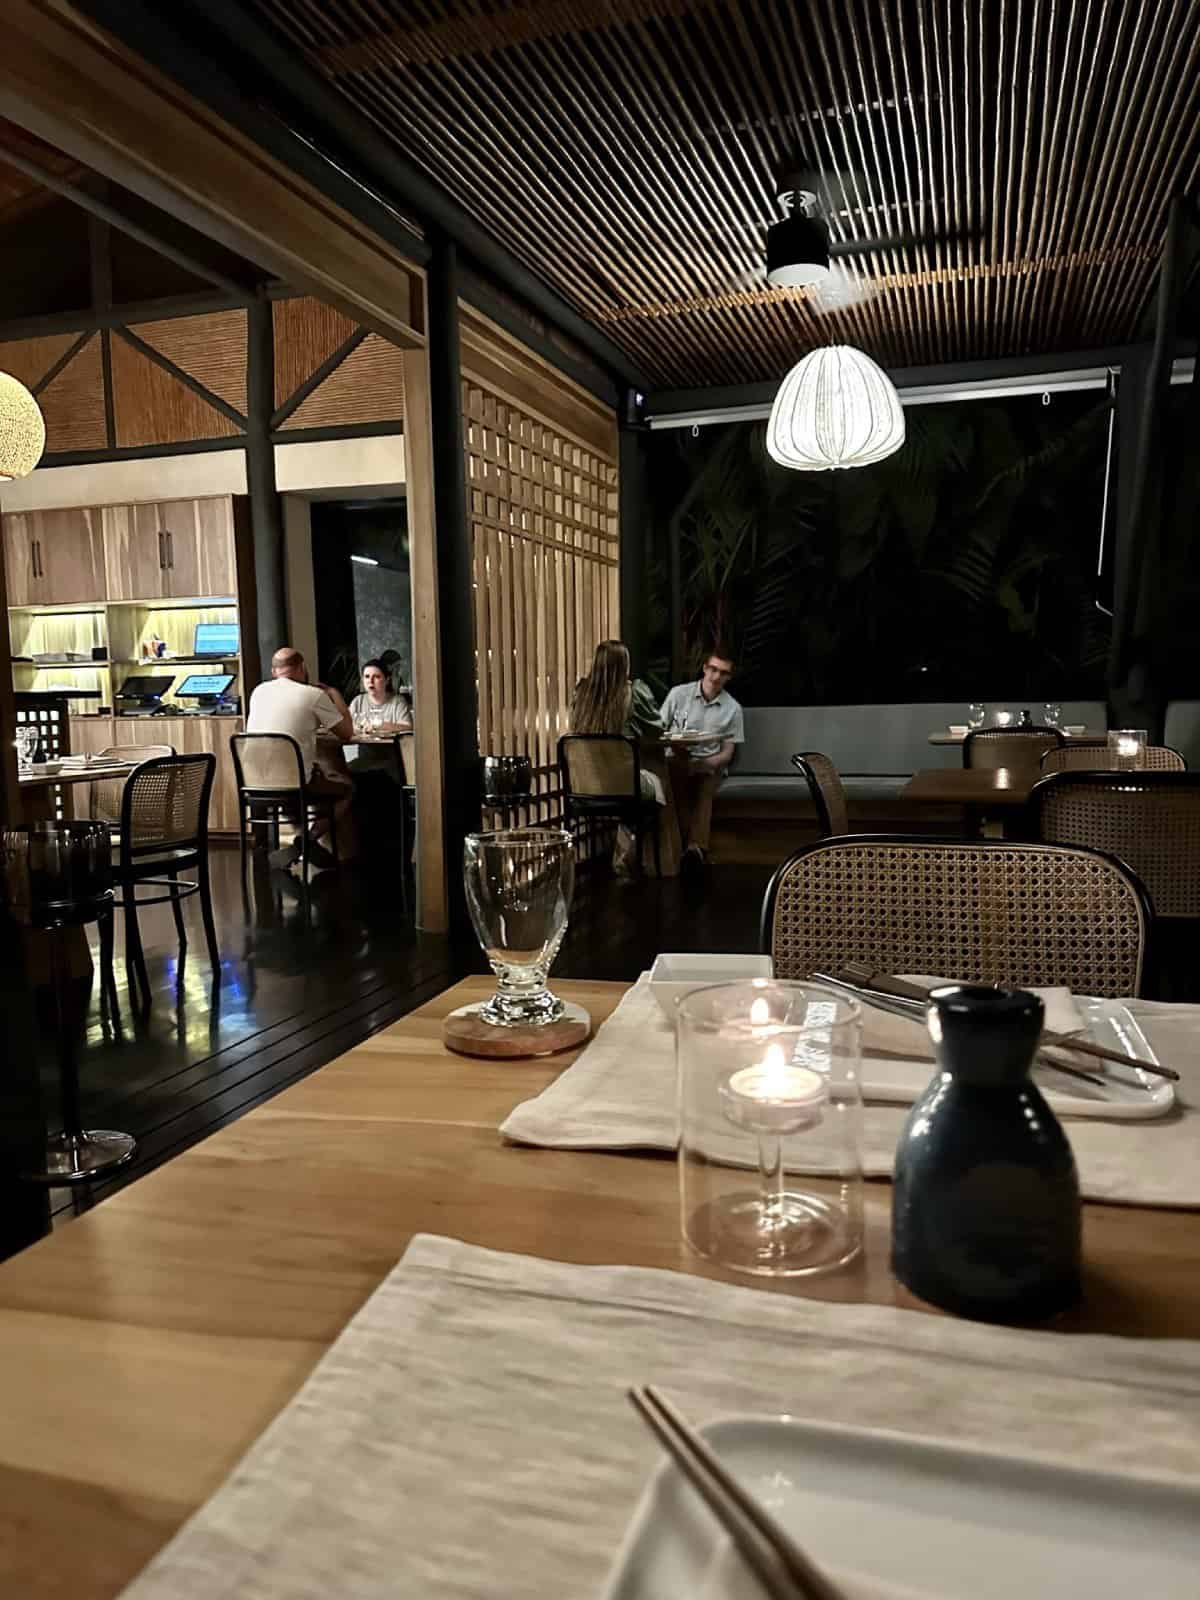 Dinner at Asia Luna at Nayara Tented Camp - what it was like staying at this luxury Costa Rica resort